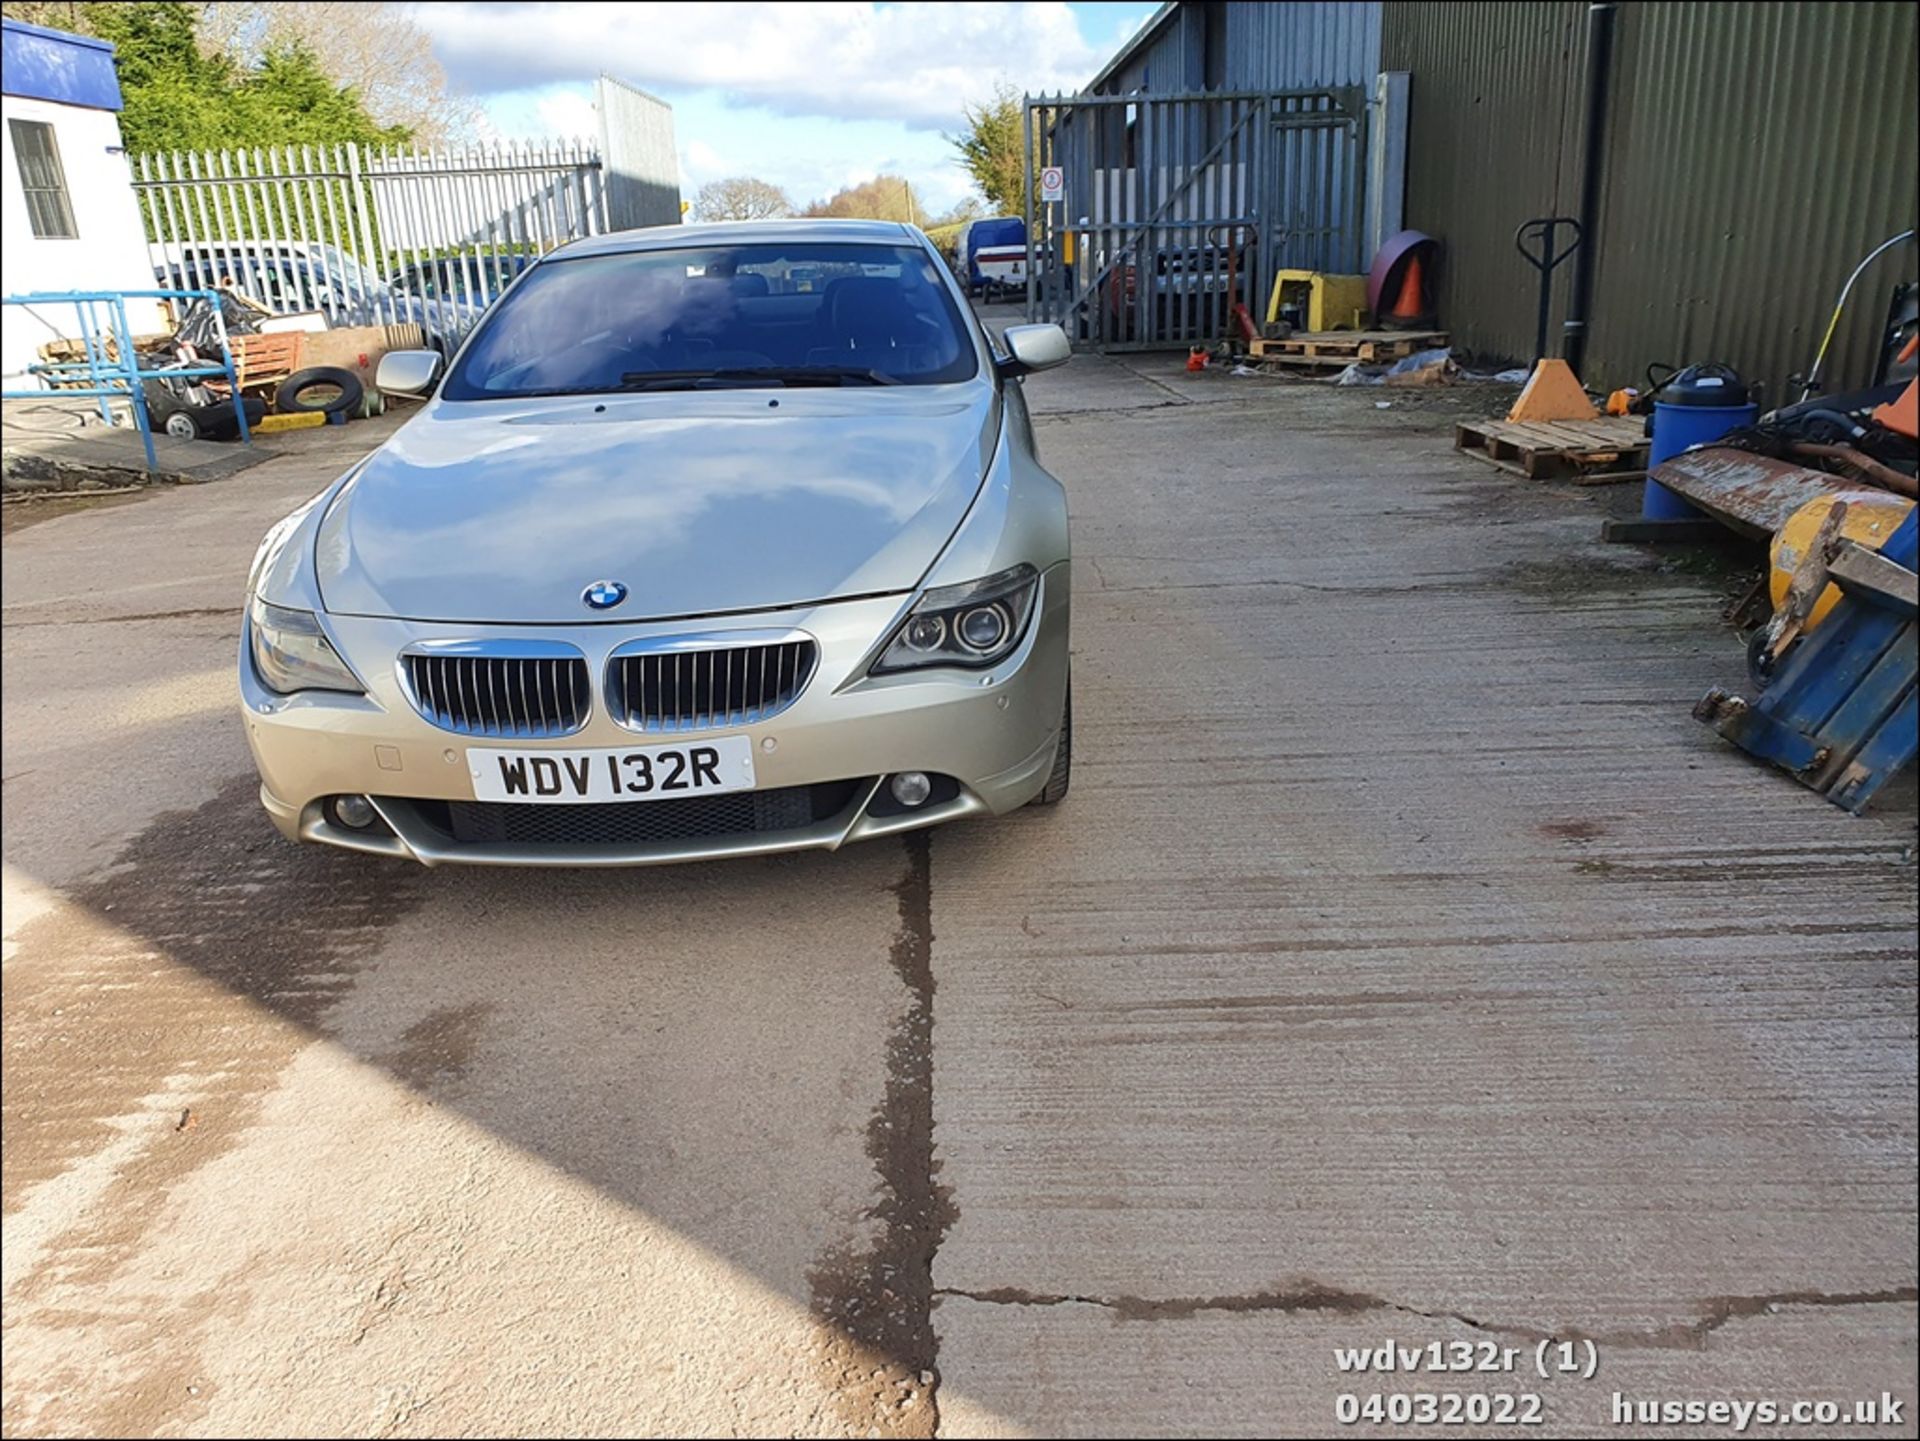 2006 BMW 650I SPORT AUTO - 4799cc 2dr Coupe (Silver) - Image 2 of 23